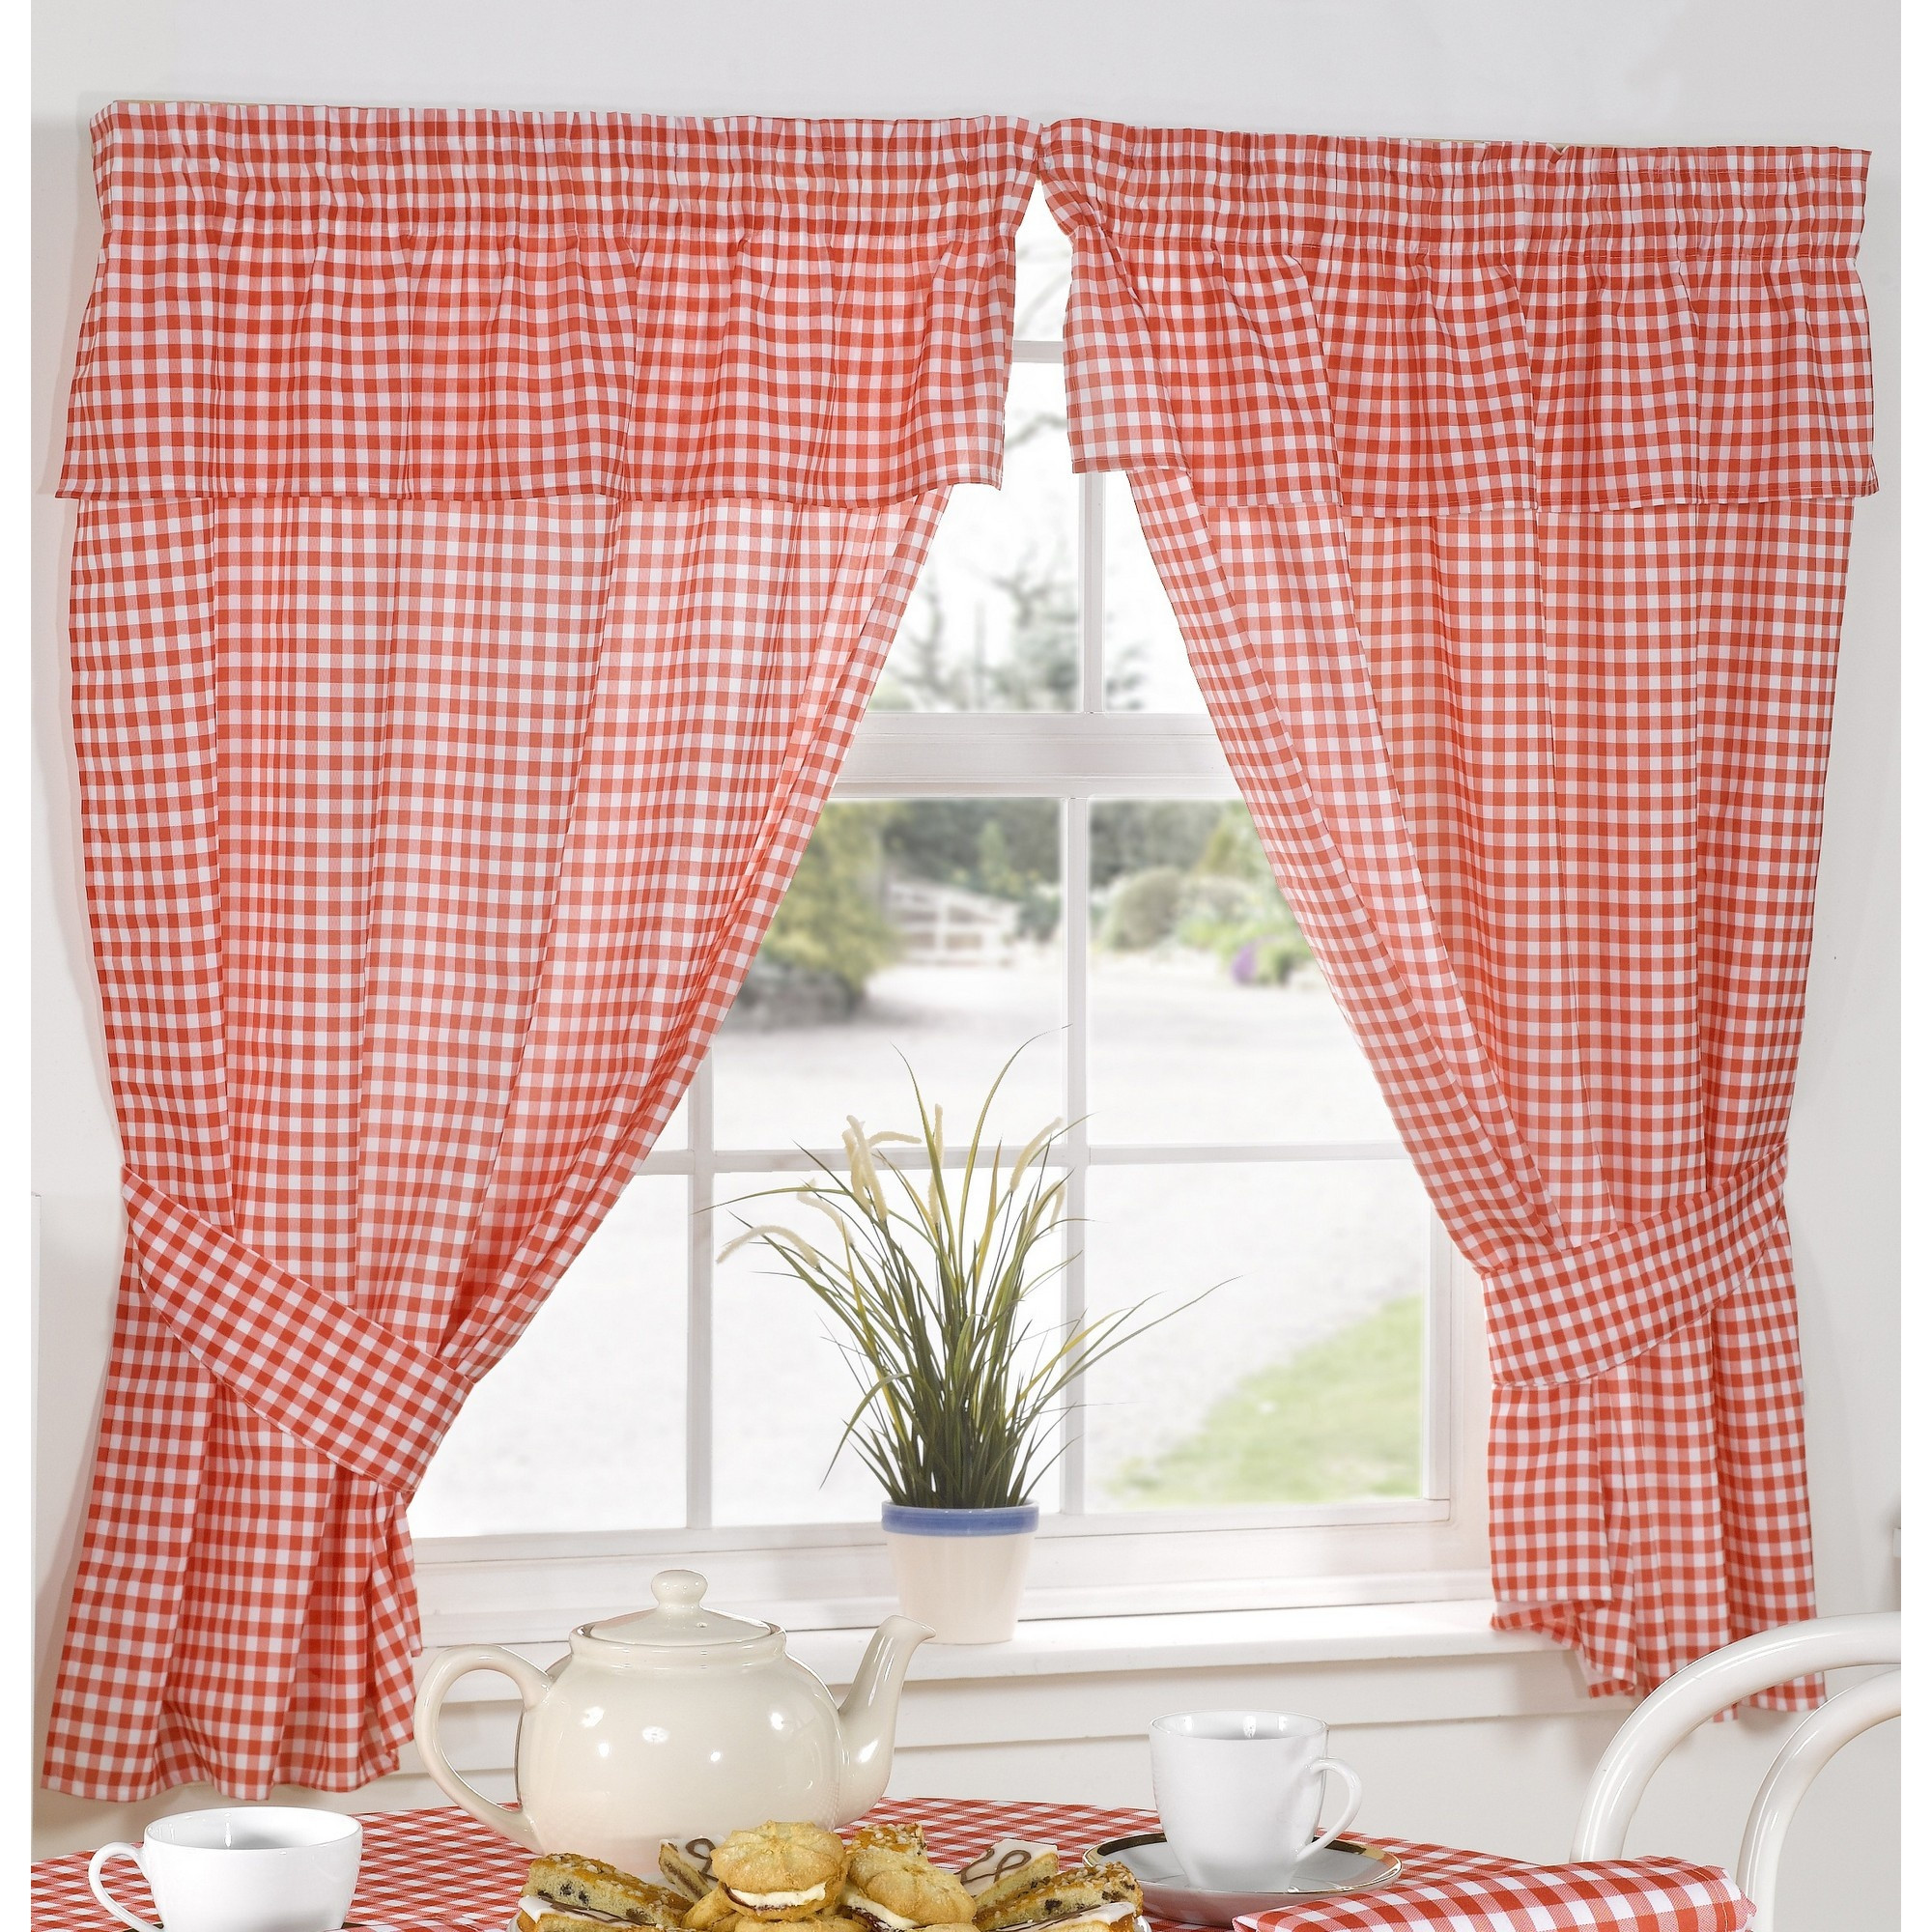 Gingham Kitchen Curtains
 Molly Gingham Check Pattern Ready Made Kitchen Curtains